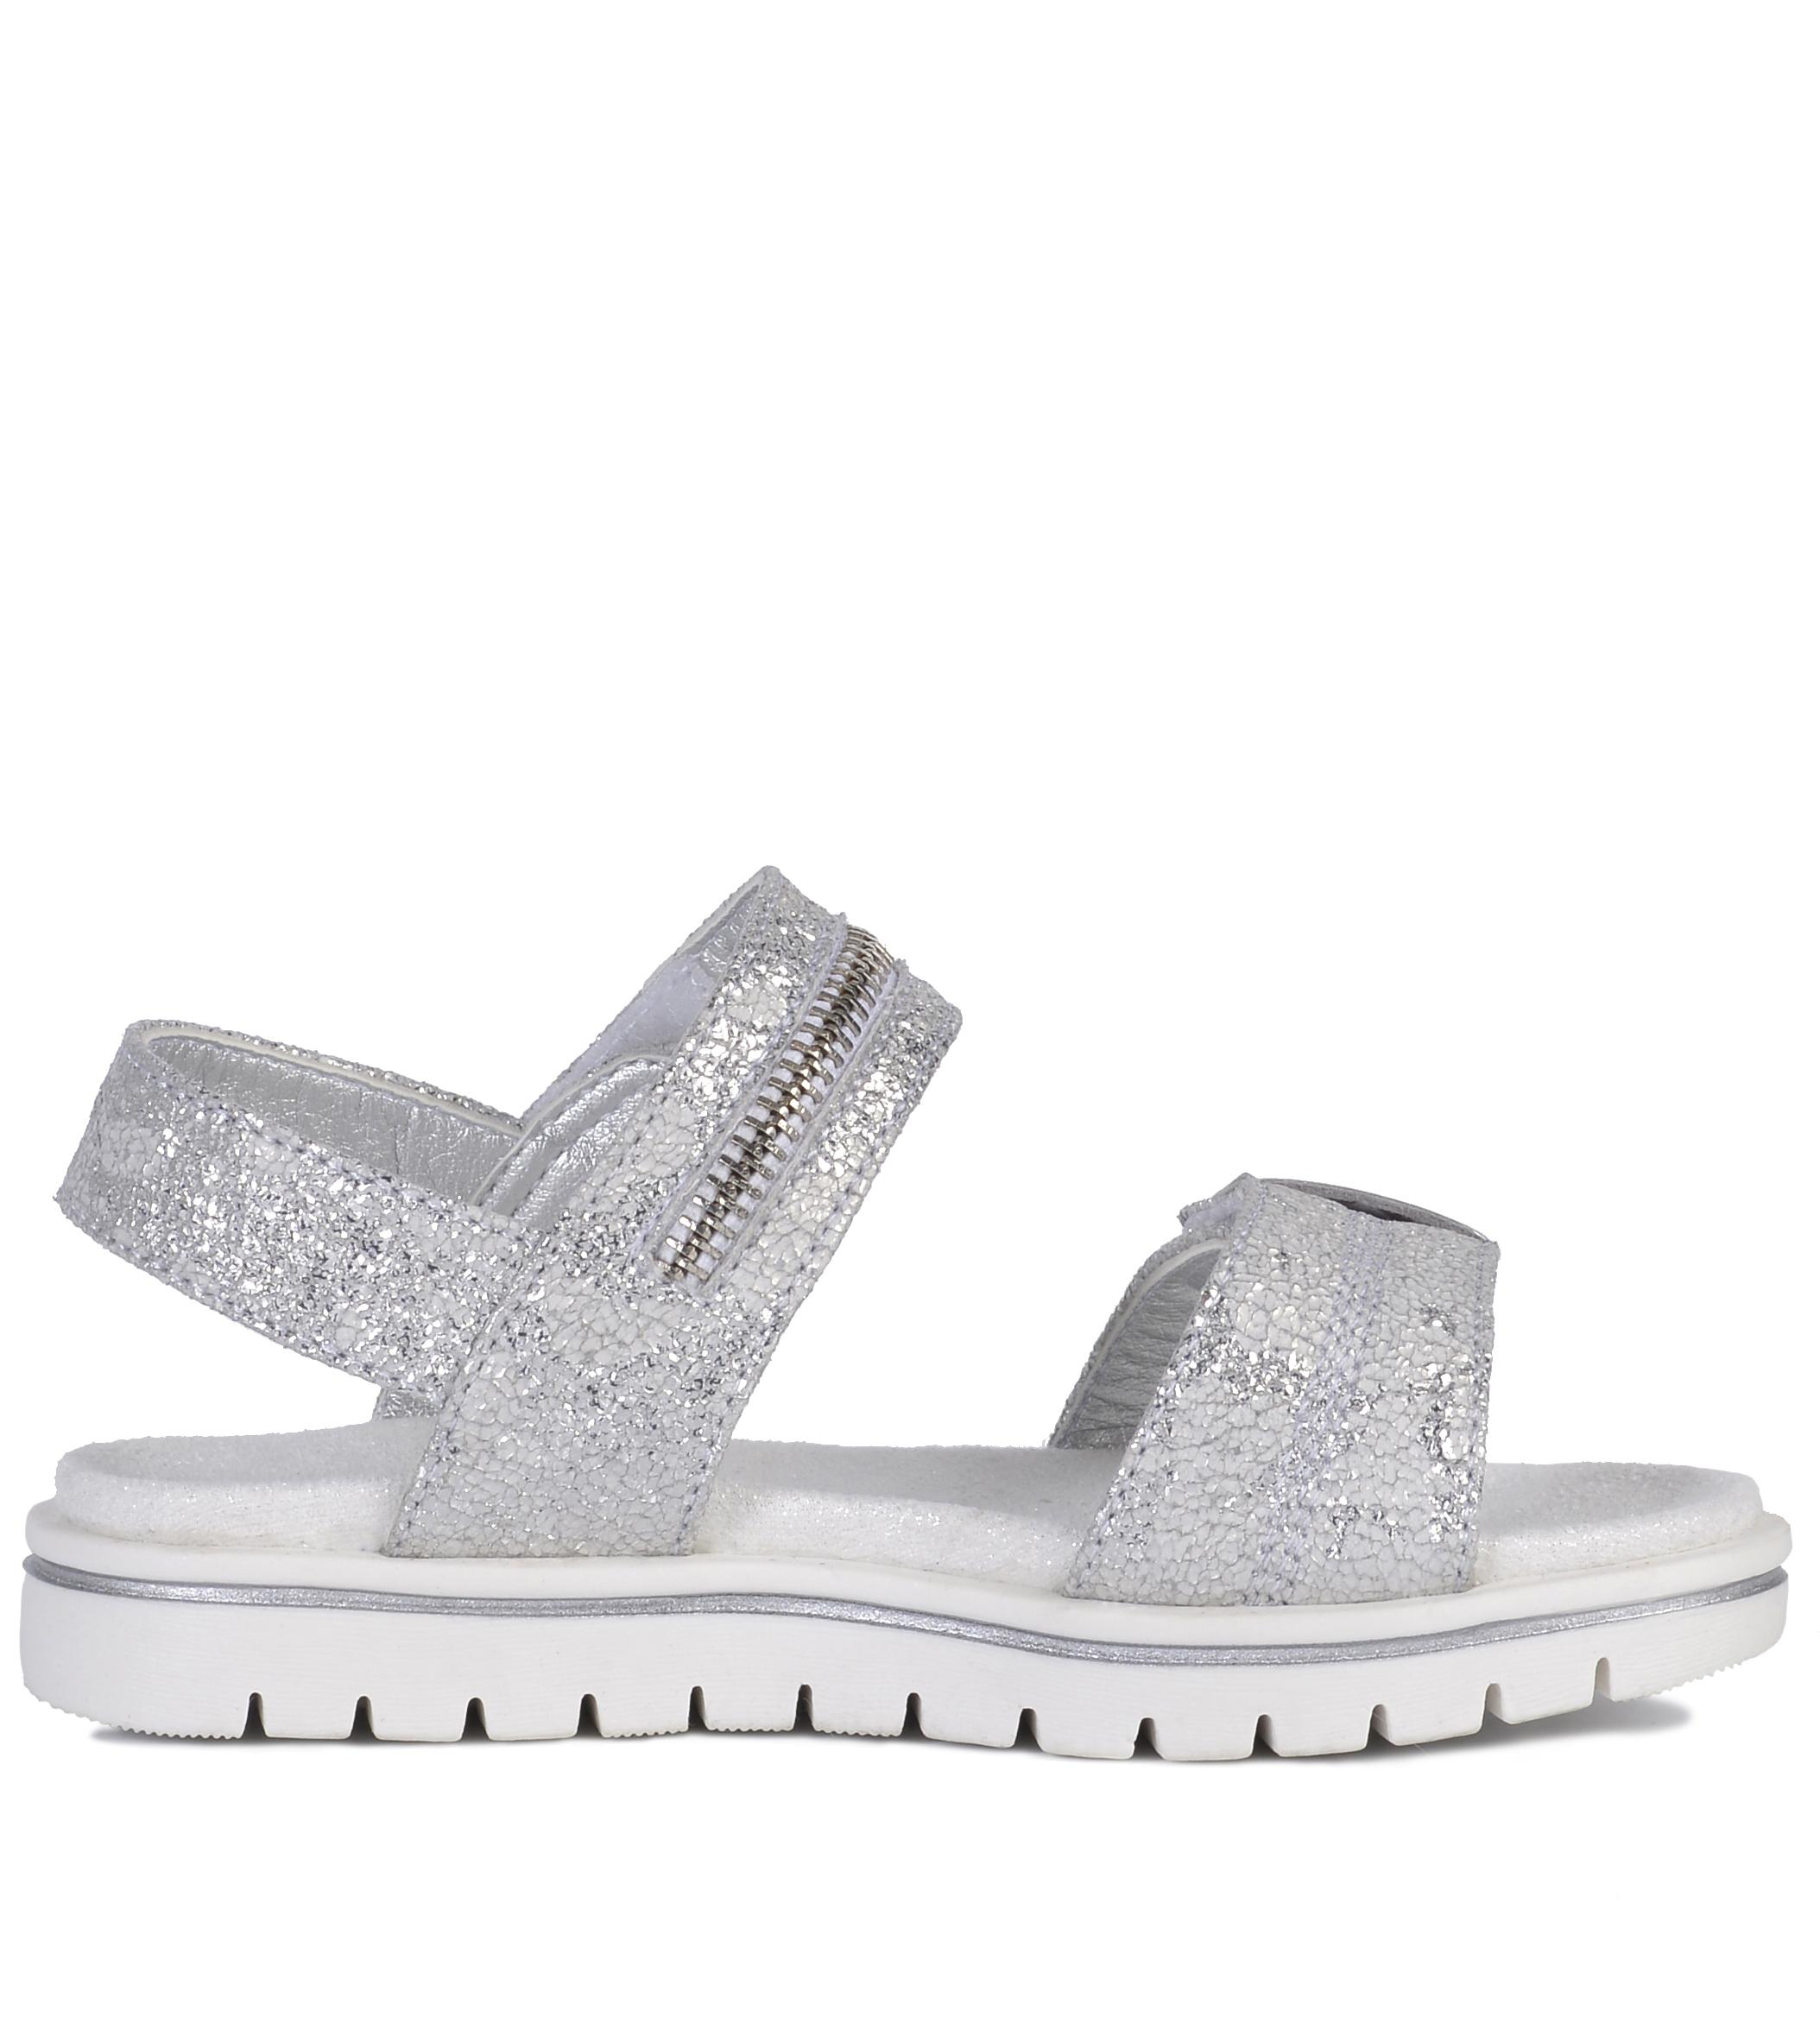 KUIPER KIDS & TEENS shoes for kids and teens - Sandals shoes